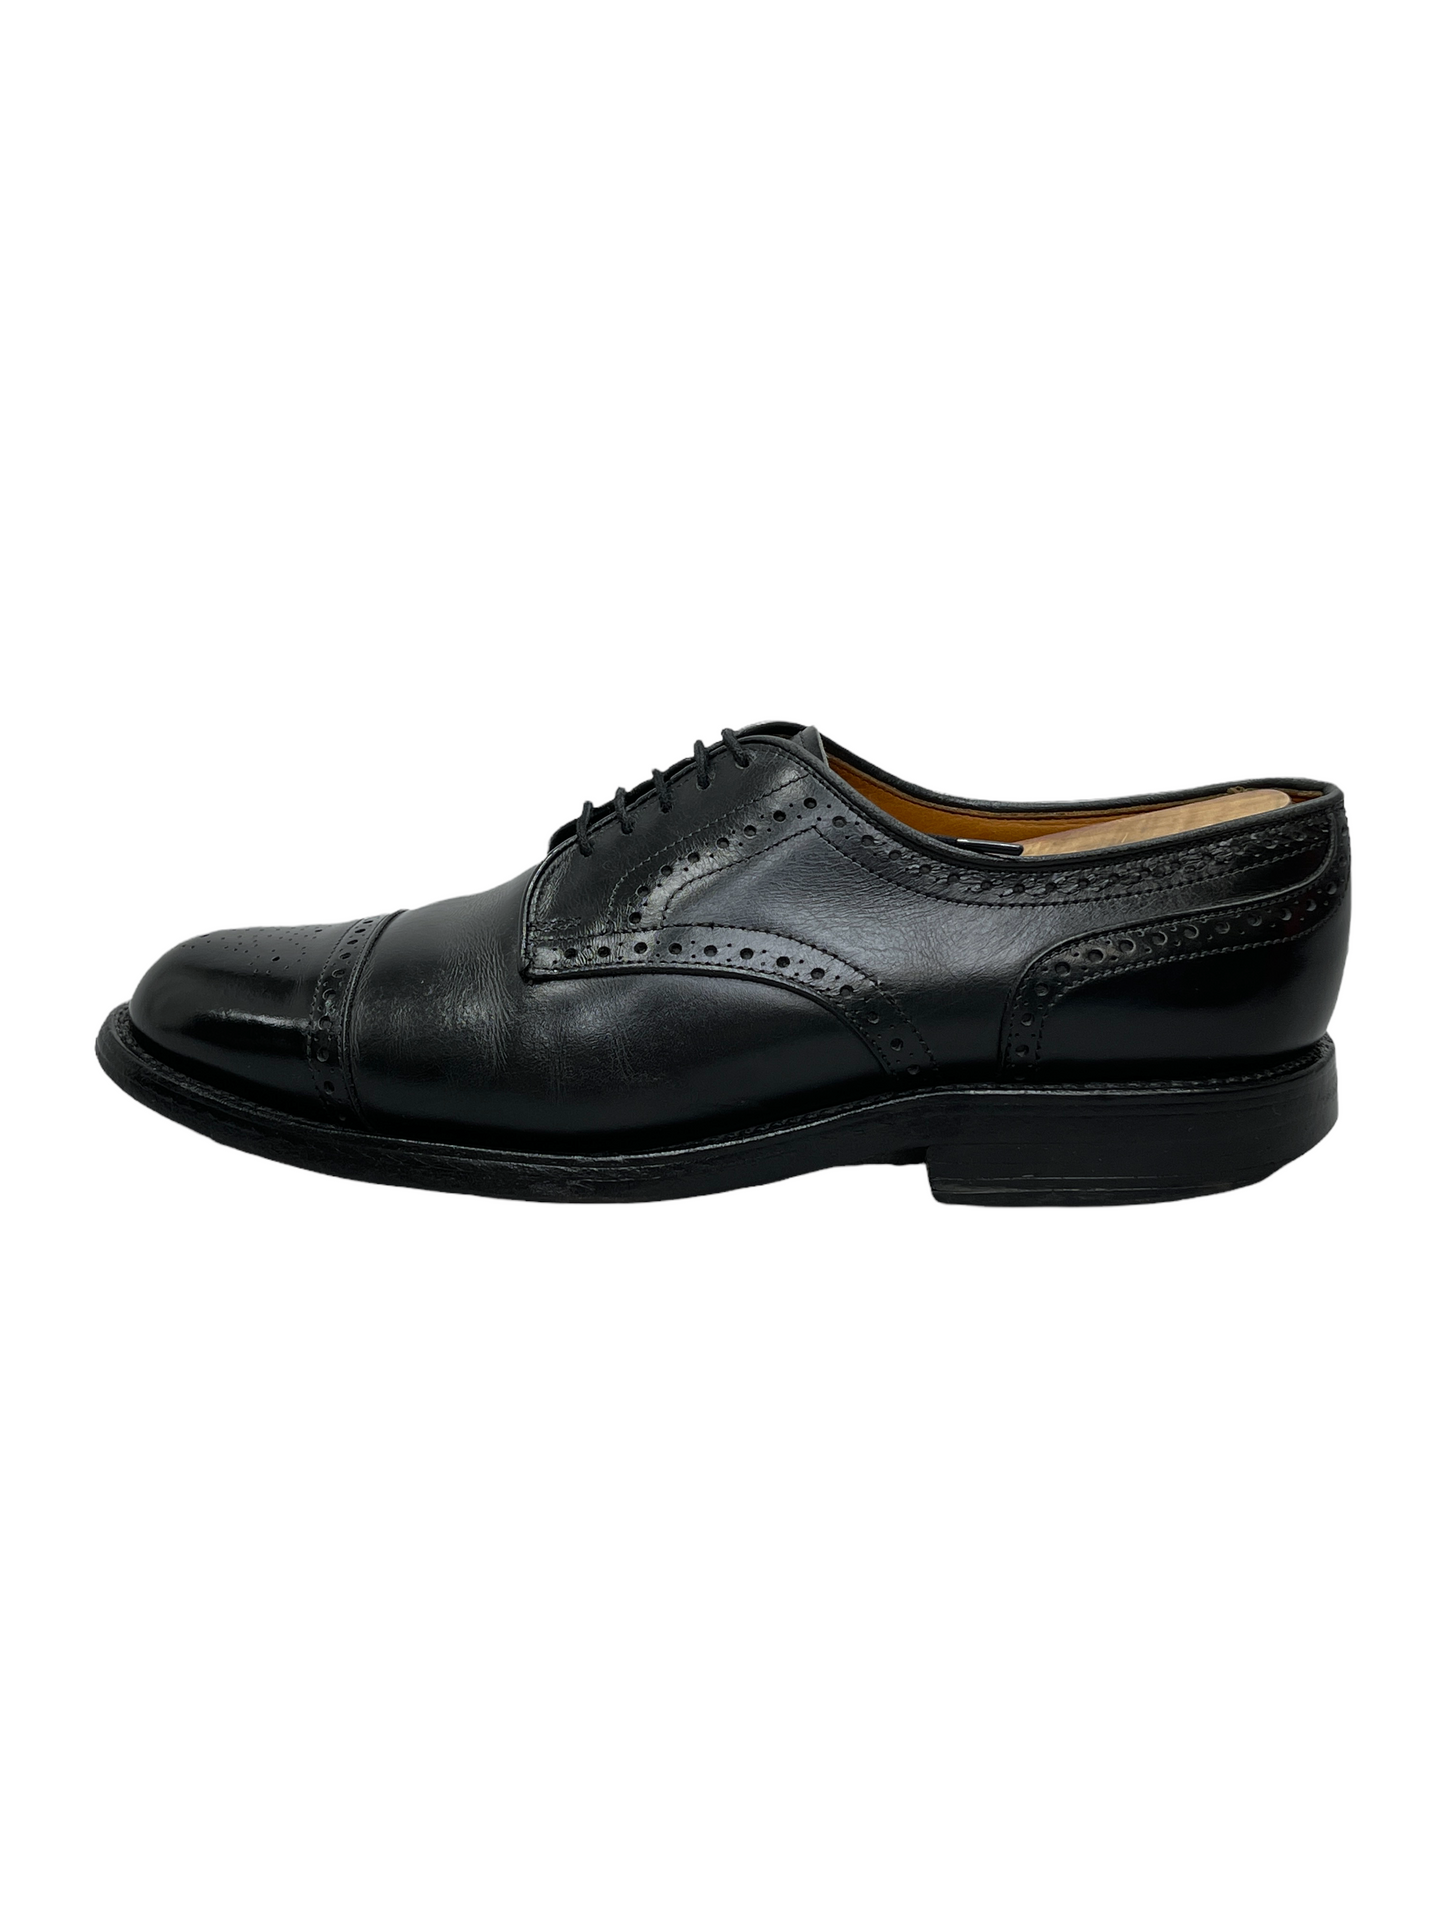 Allen Edmonds Lexington Black Leather Derby Dress Shoes 9.5 D US Men — Genuine Design luxury consignment Calgary, Canada New and pre-owned clothing, shoes, accessories.